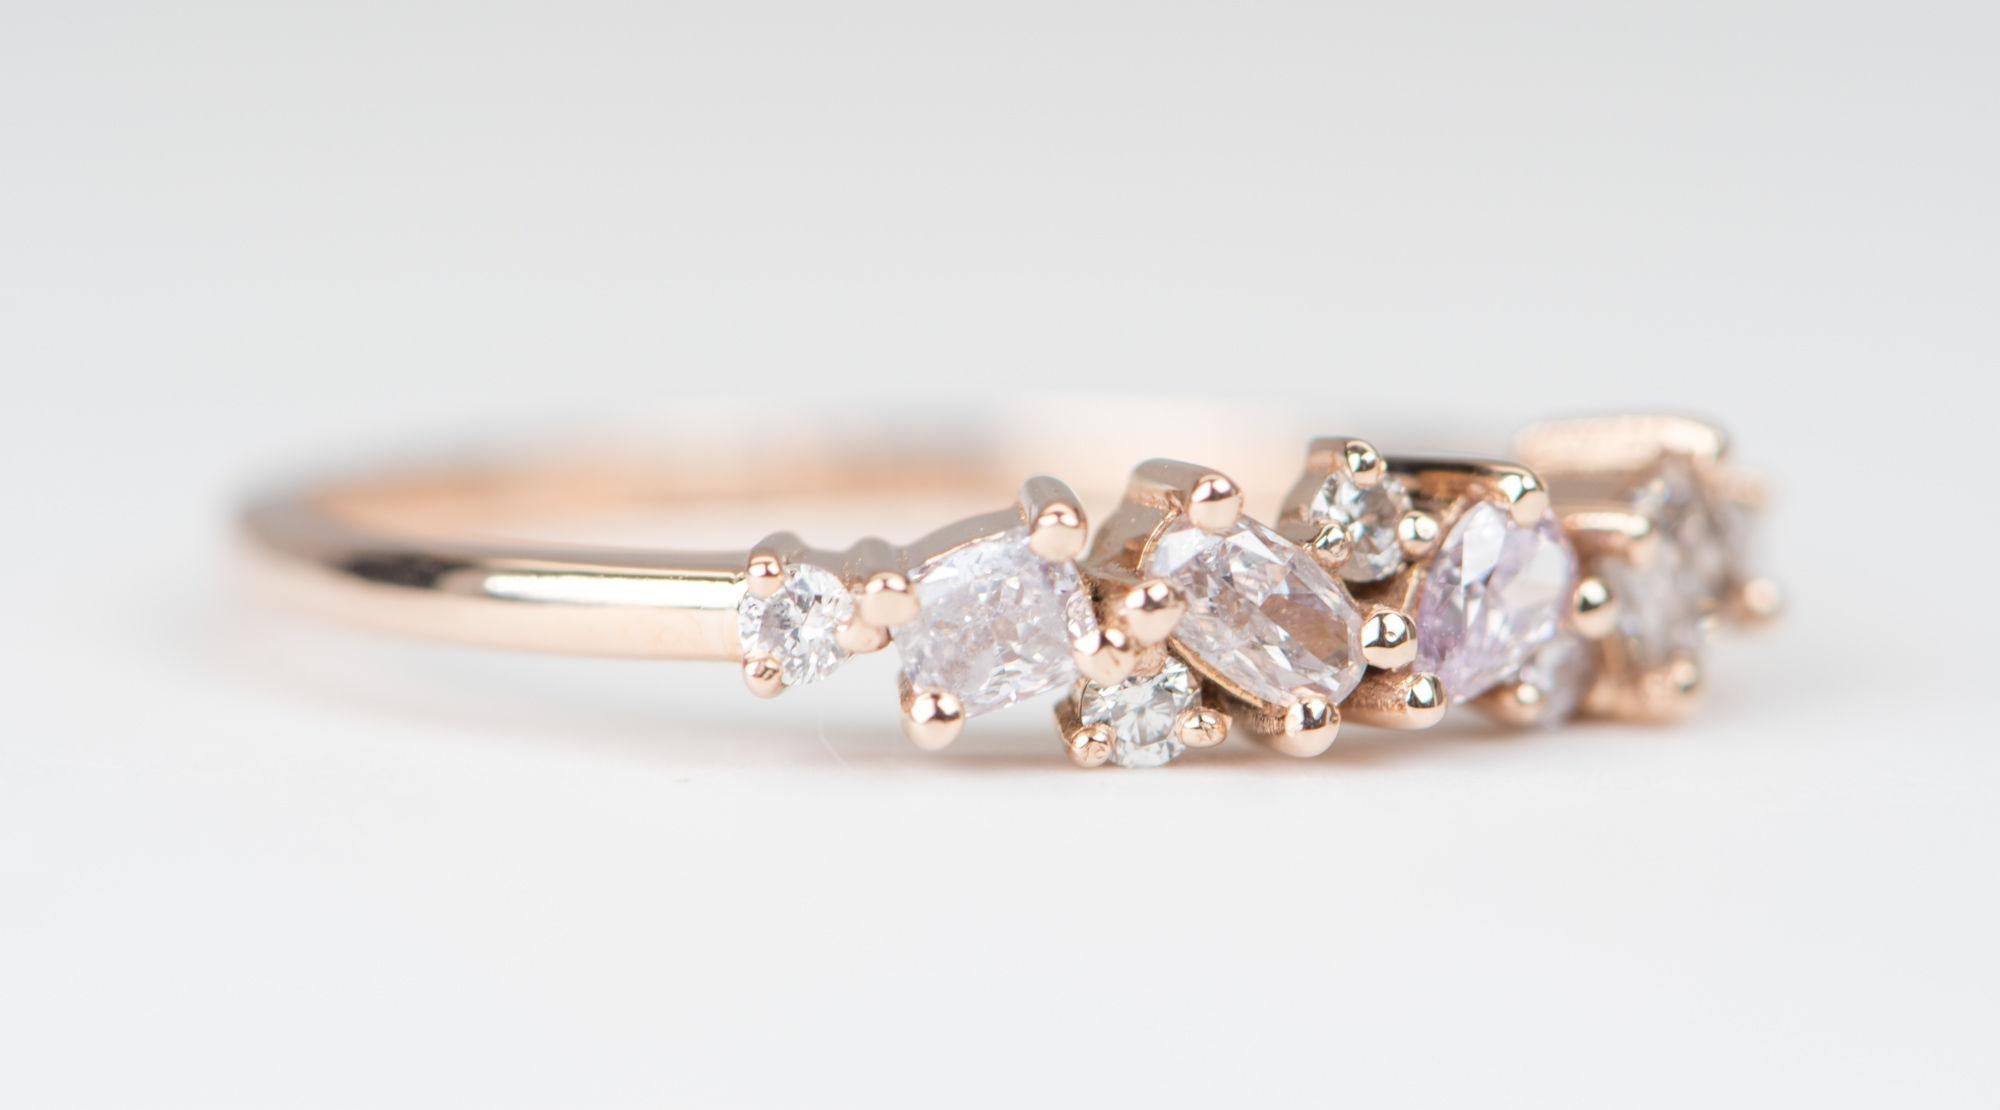 ♥ Natural Pink Diamond Cluster 14K Rose Gold Wedding Band
♥ Solid 14k rose gold ring set with beautiful mix-shaped pink diamonds
♥ Gorgeous light pink color!
♥ The item measures 4.04 mm in length, 15.7 mm in width, and stands 3.3 mm from the